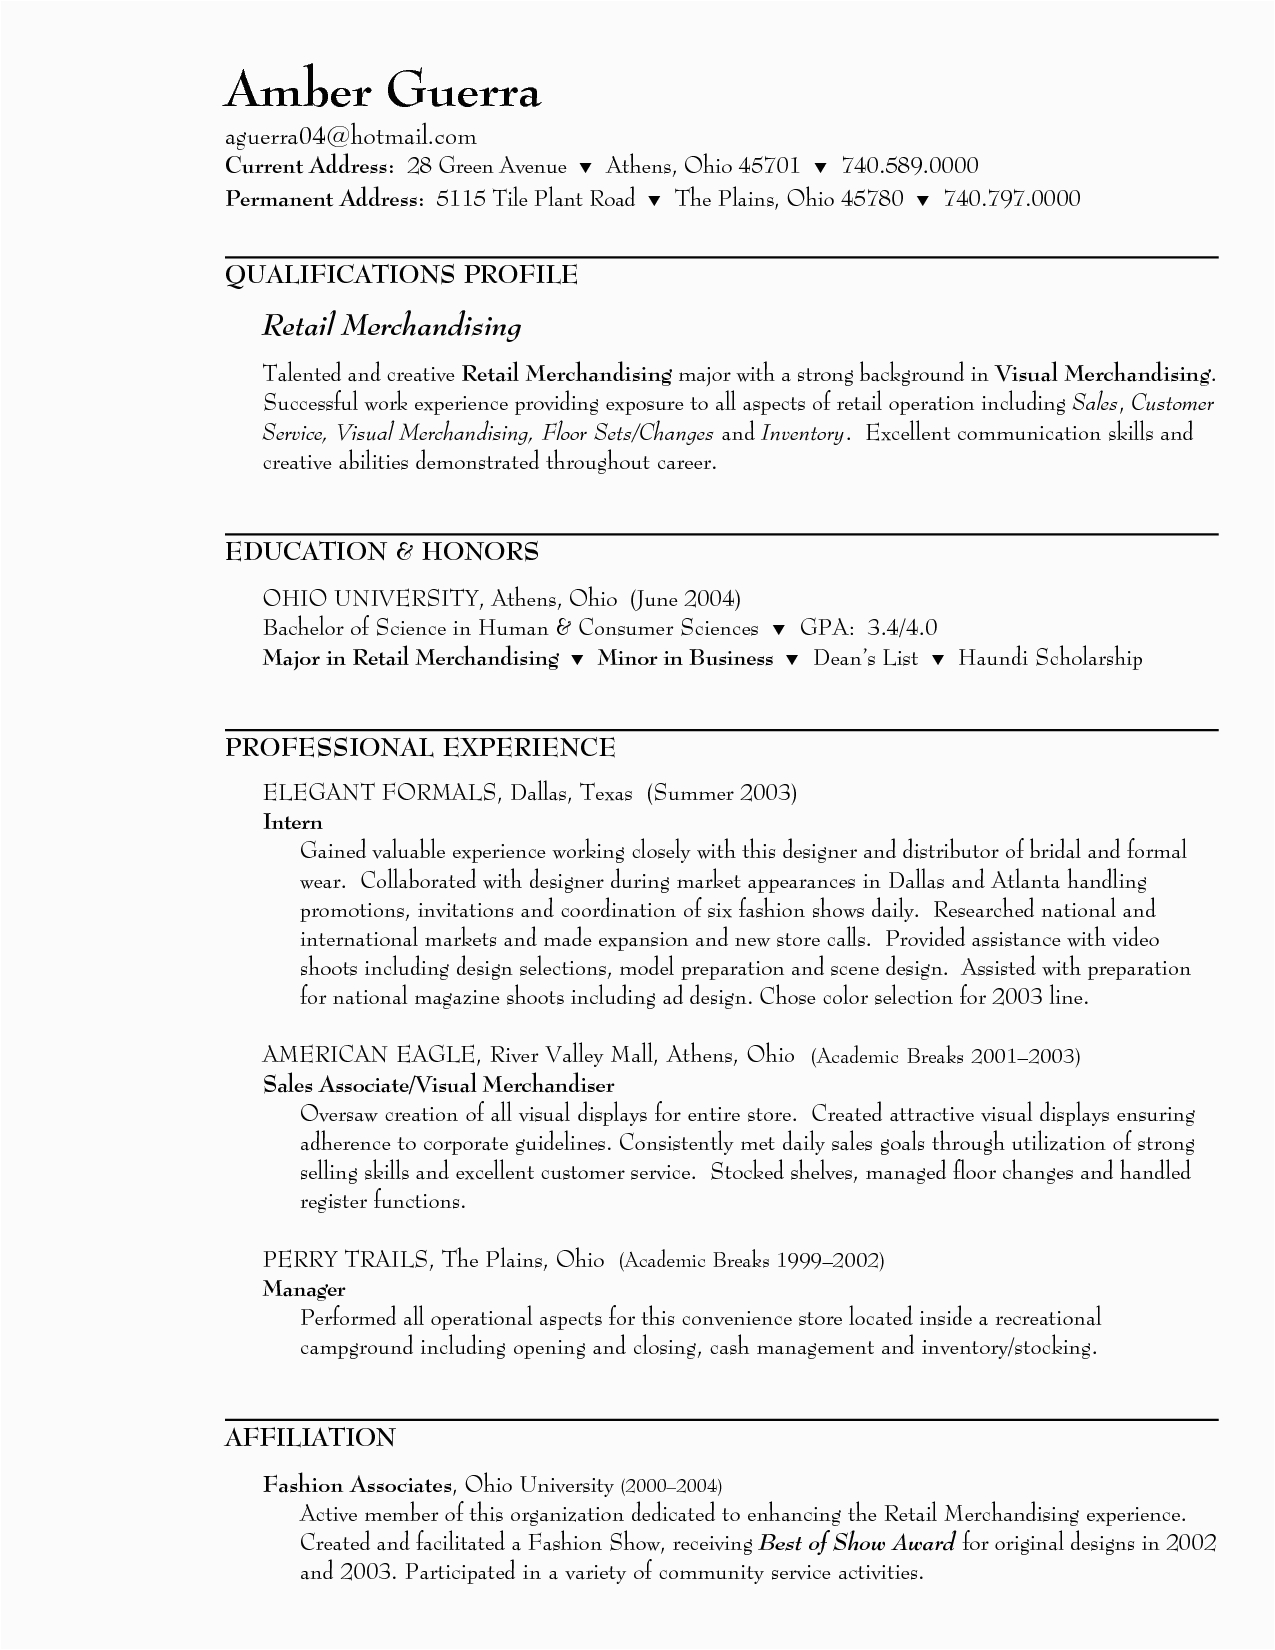 Sample Resume for Clothing Store Sales associate Sample Resume for Retail Sales associate In A Clothing